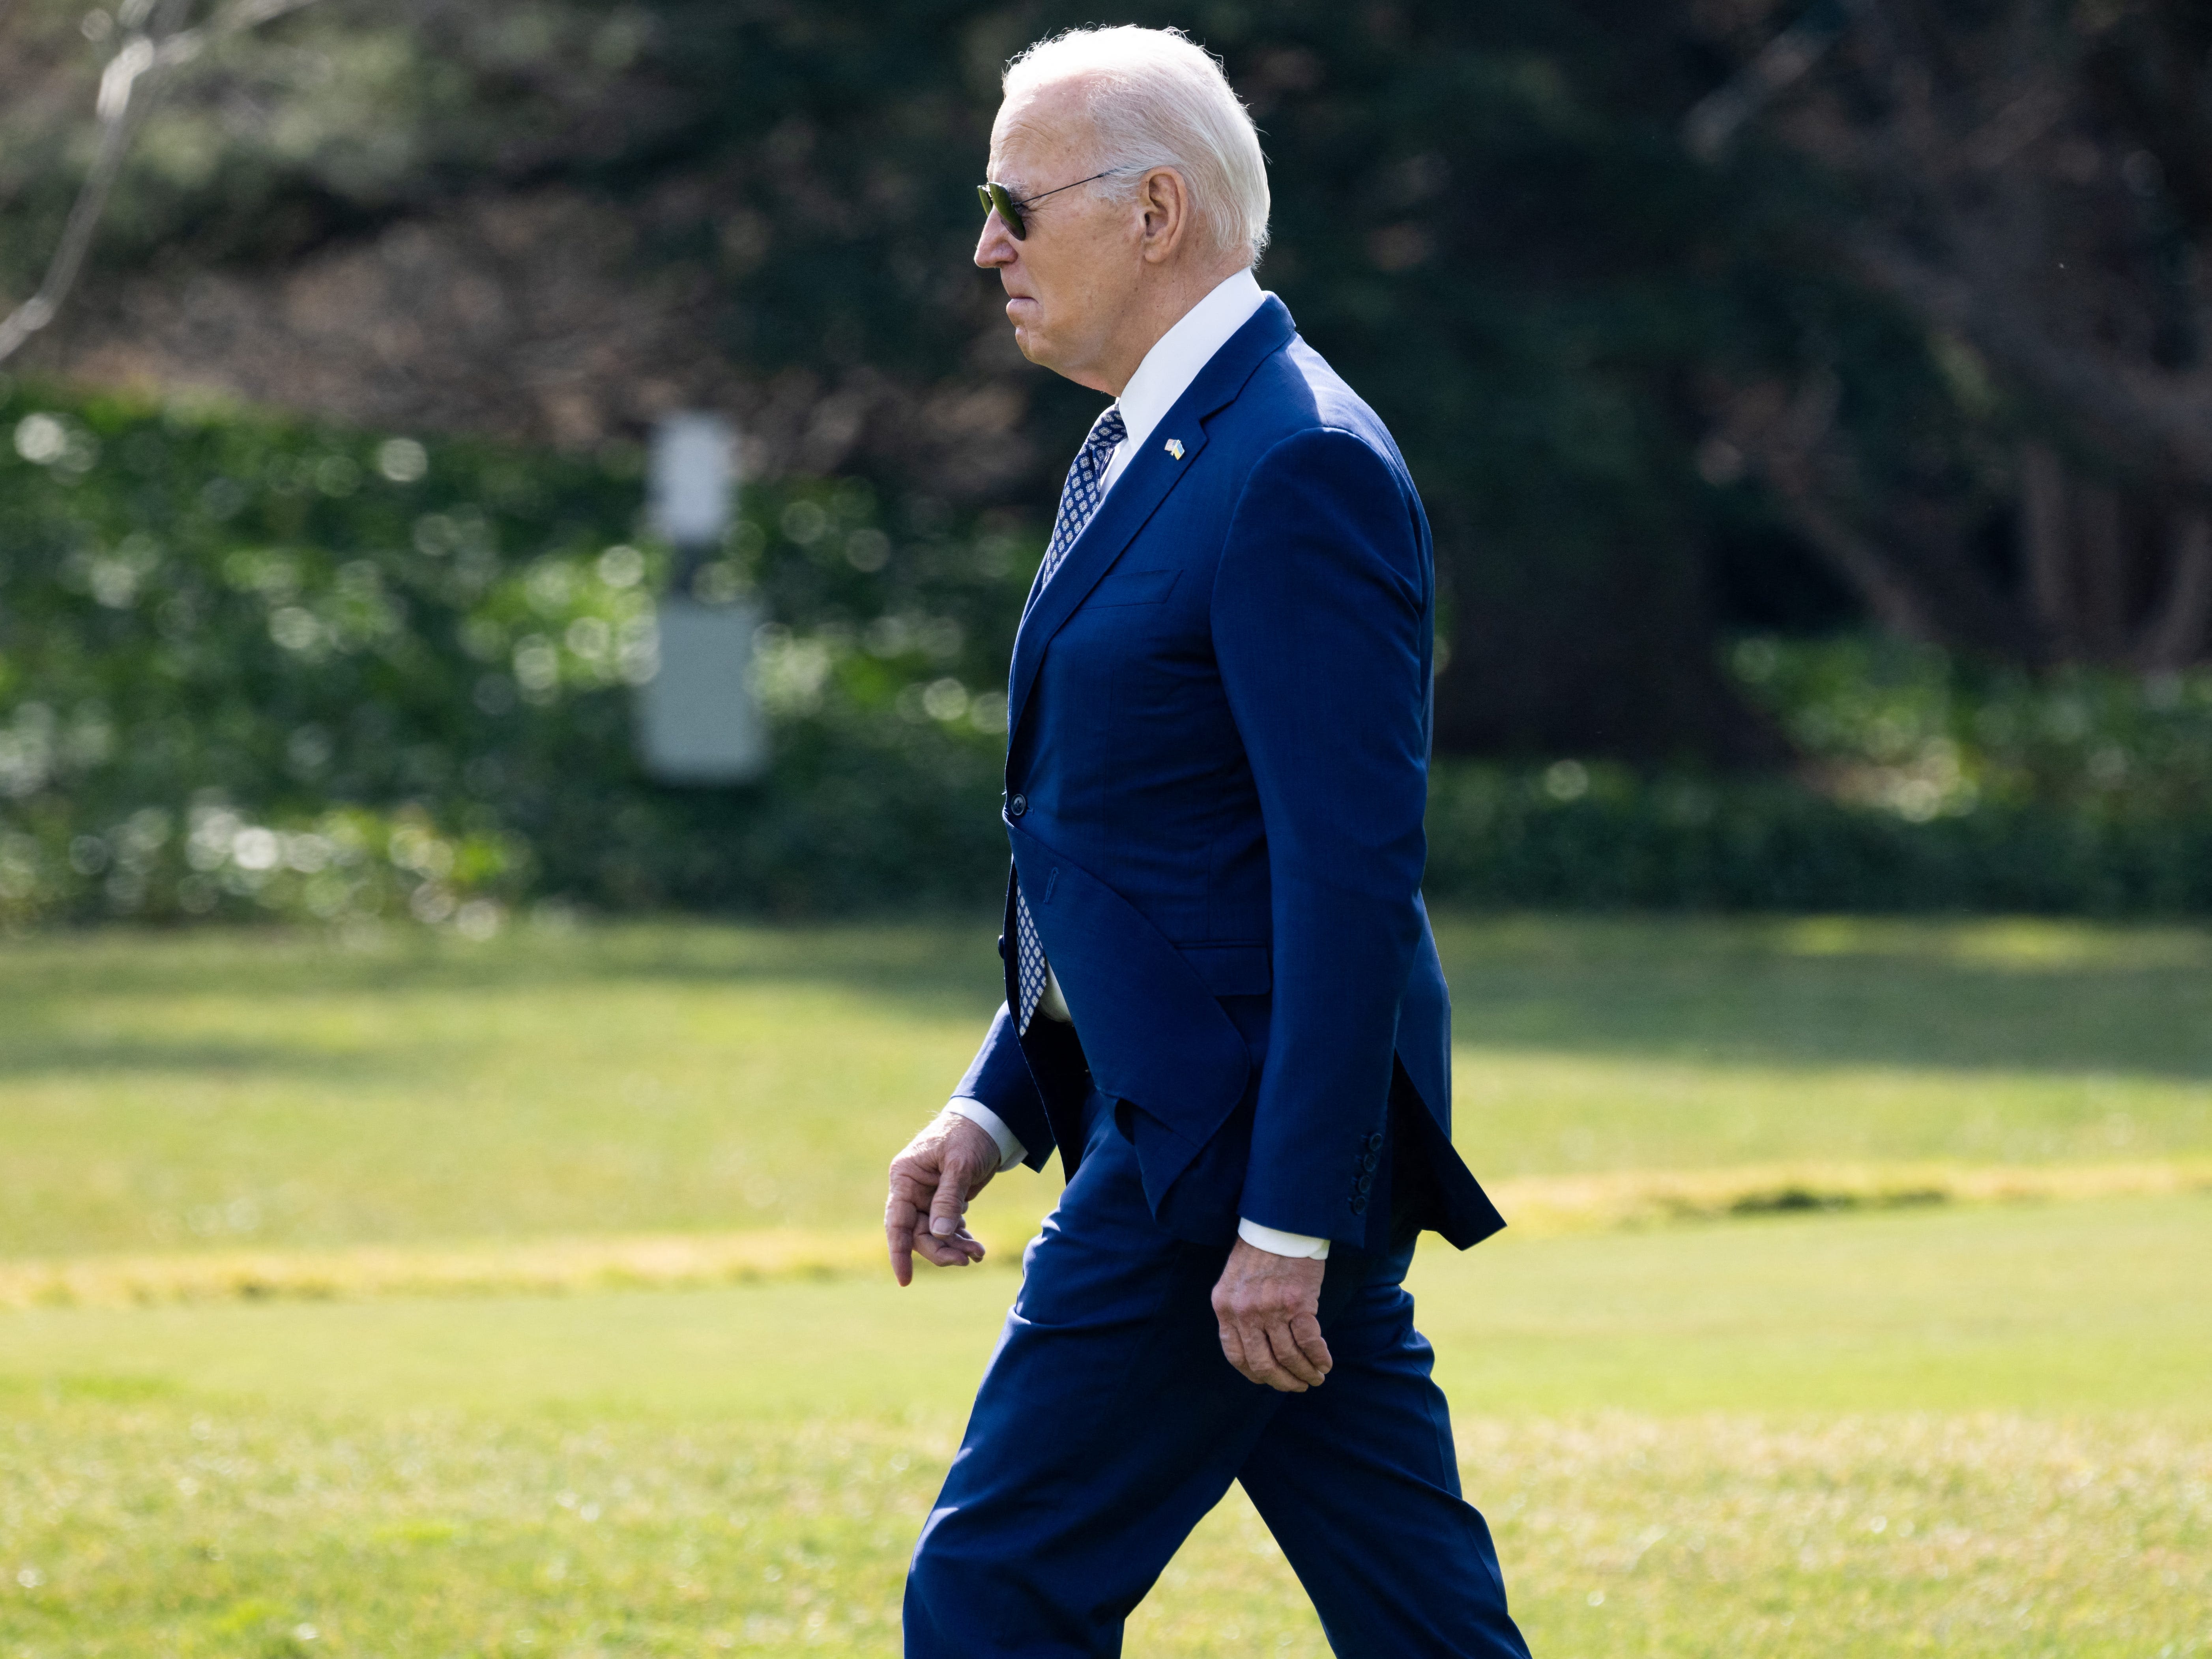 Biden spoke so low during a key White House meeting that some attendees struggled to understand his words, report says